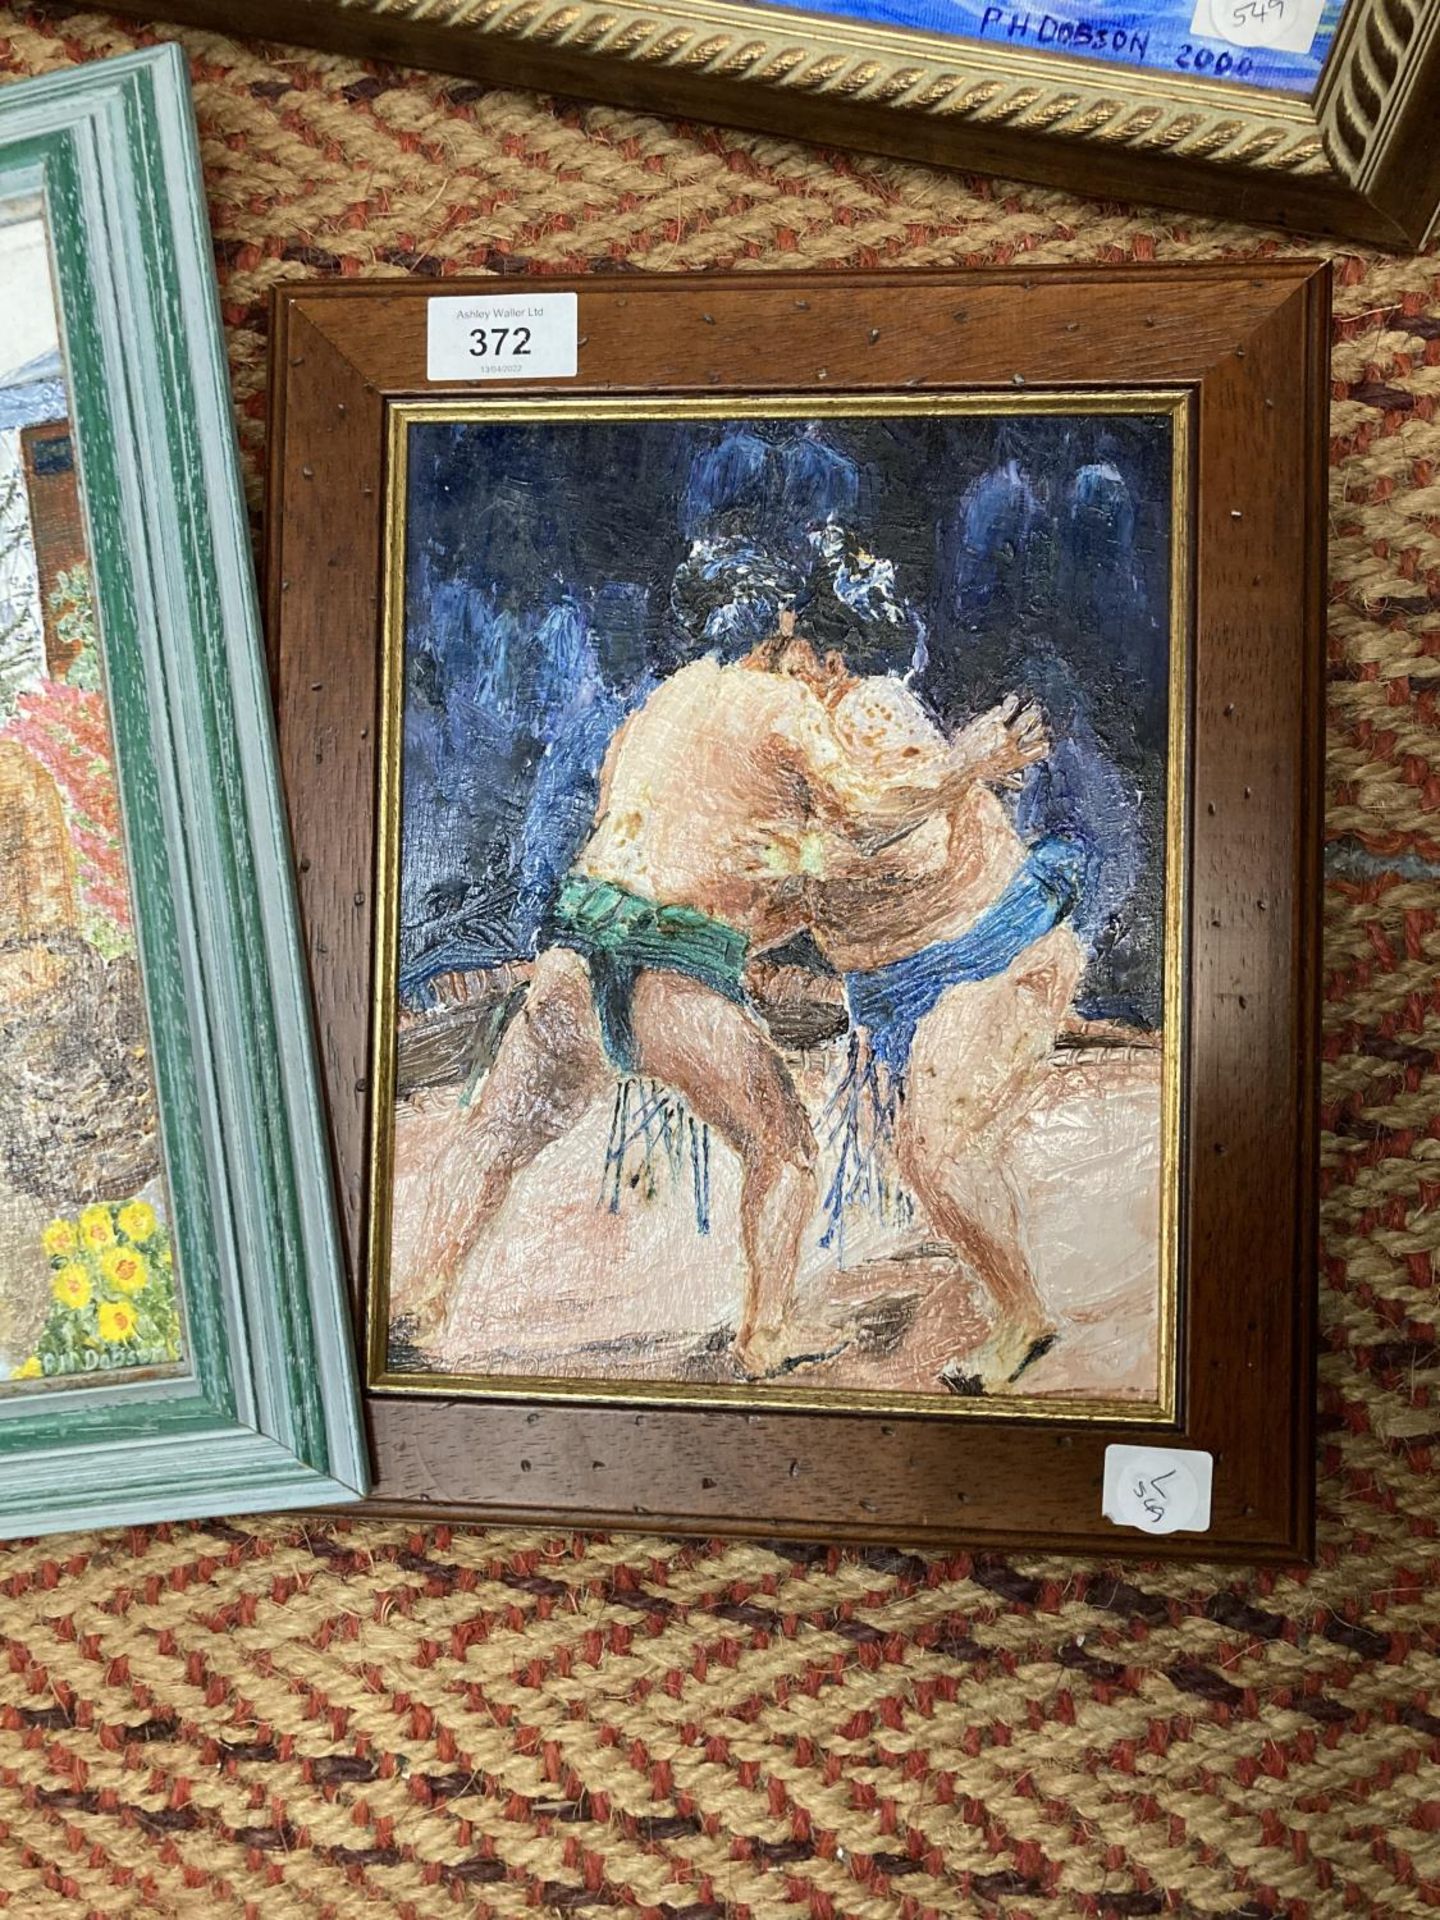 FOUR FRAMED OIL ON CANVAS DEPICTING A MAN PLAYING A CELLO, SUMO WRESTLERS FIGHTING, A LADY - Image 3 of 5